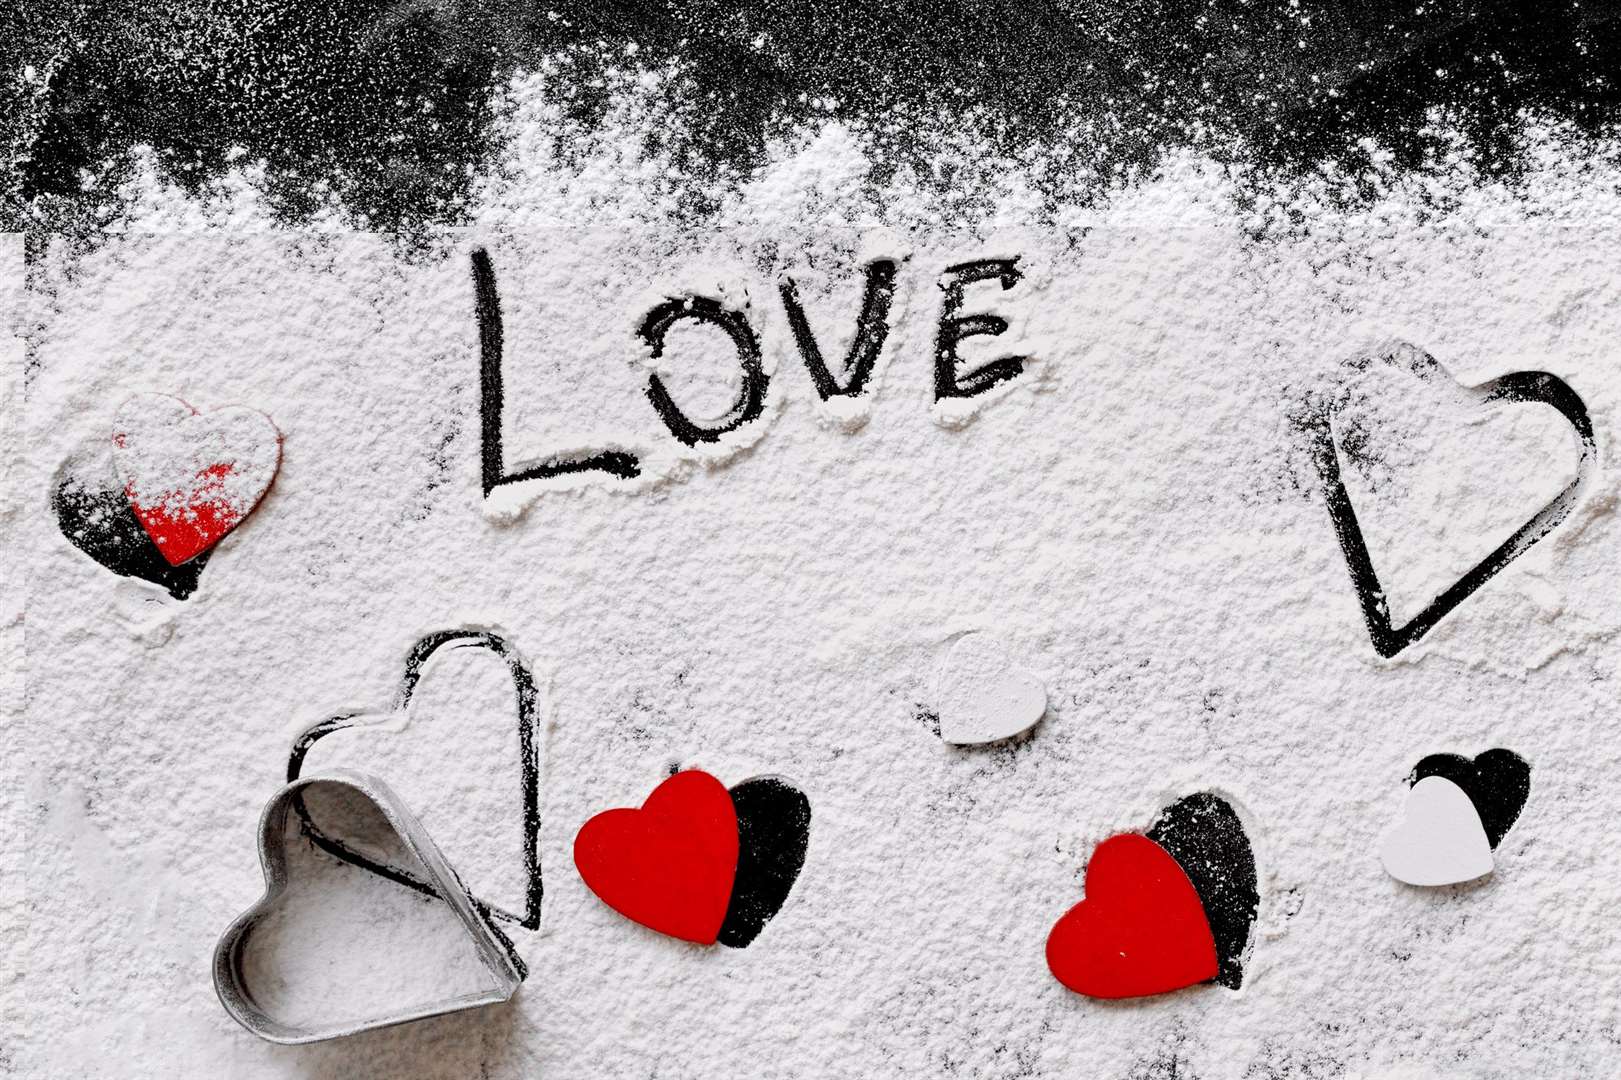 How will you show the love this weekend?